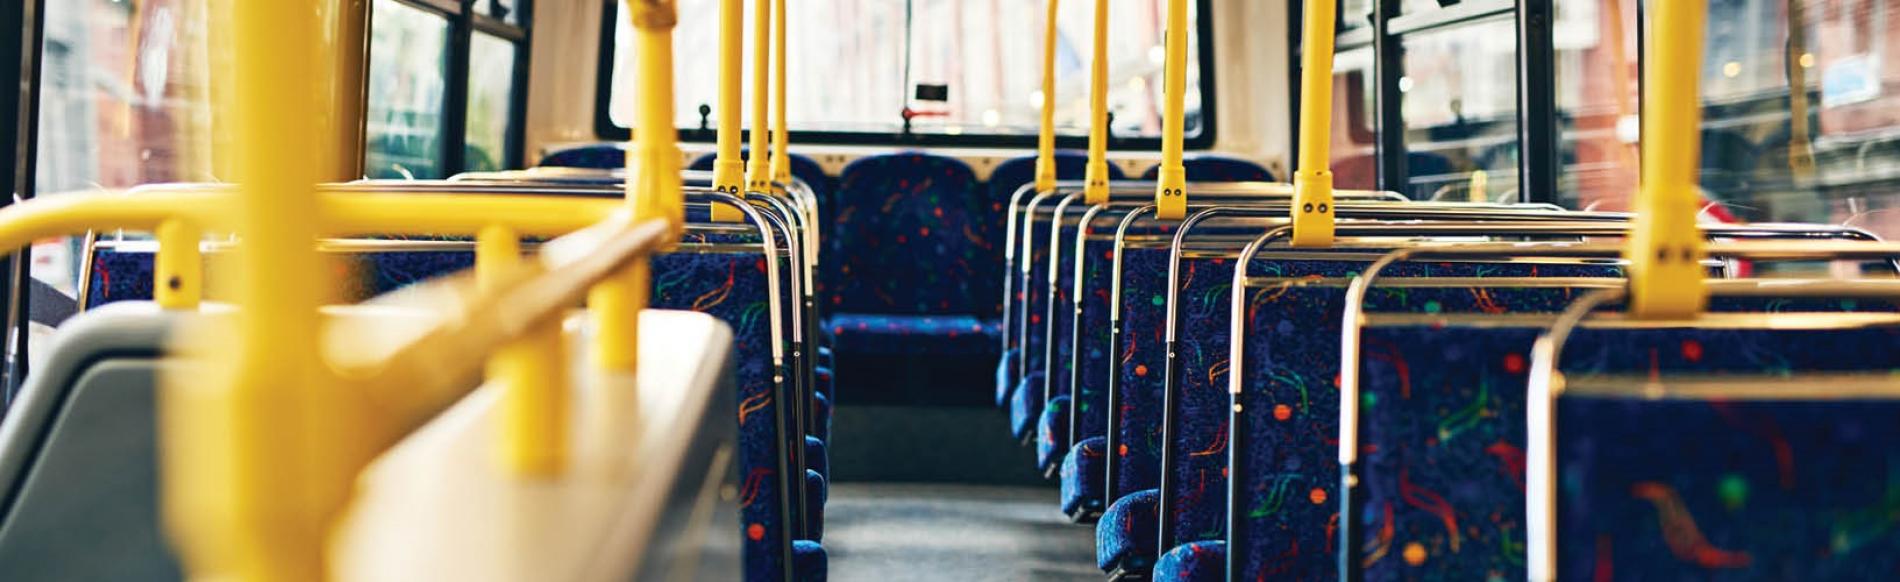 A public bus with empty seats